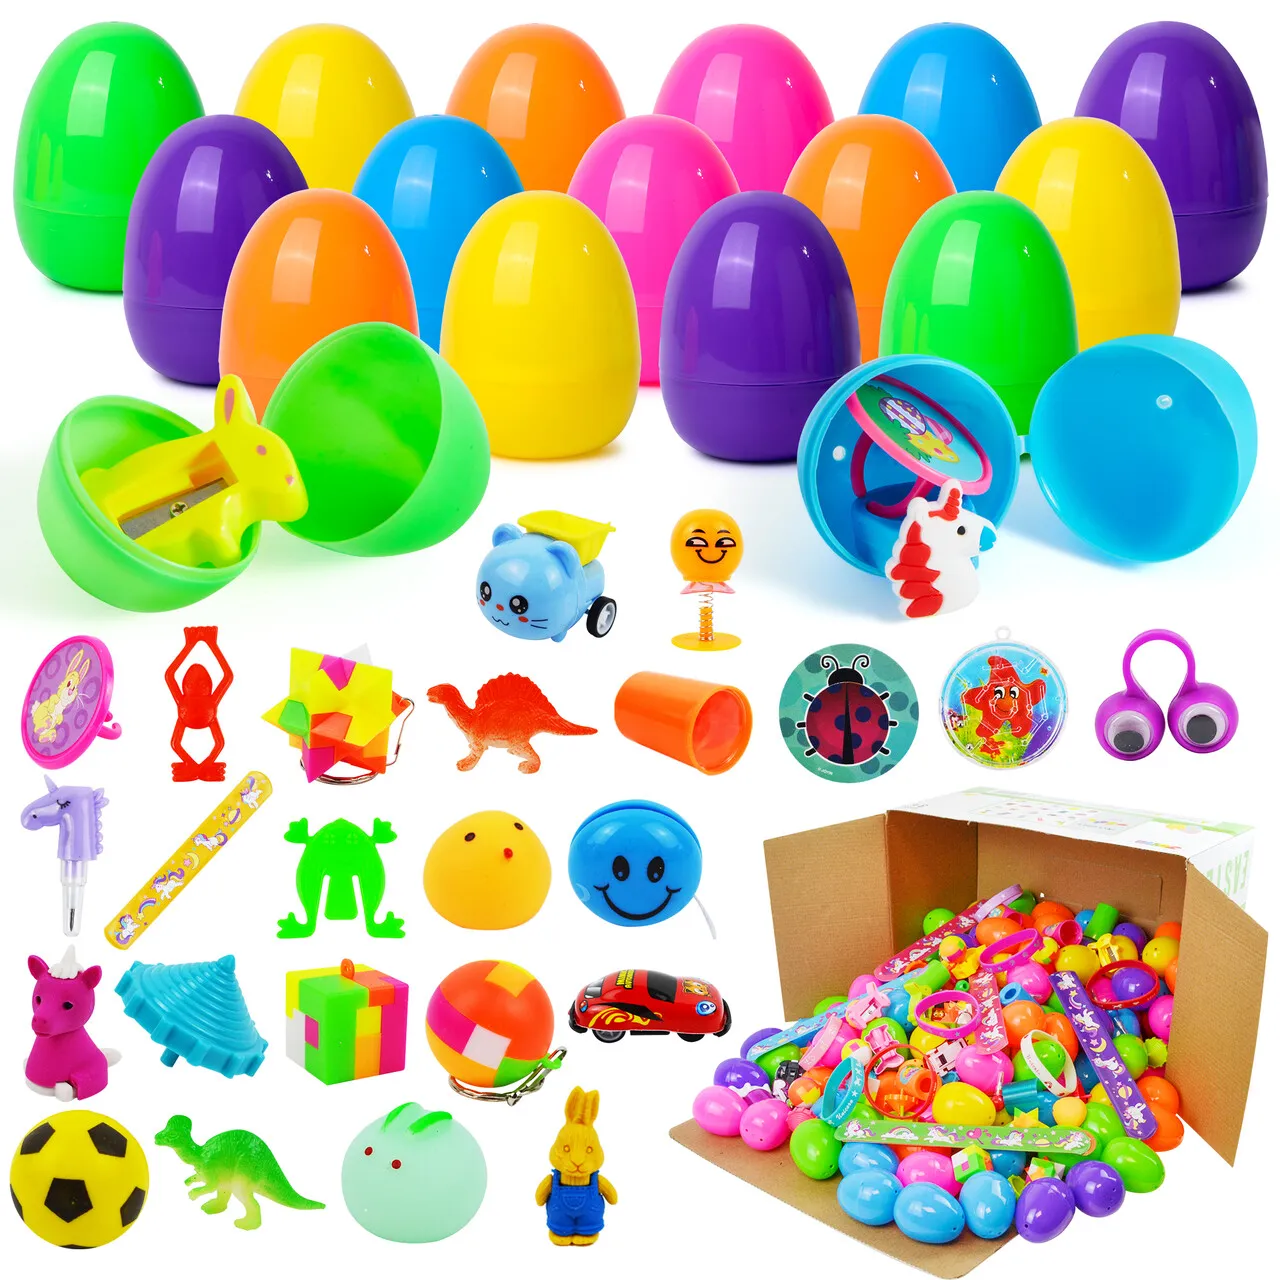 You are currently viewing How do I choose pre-filled Easter eggs for a diverse age group at a party?